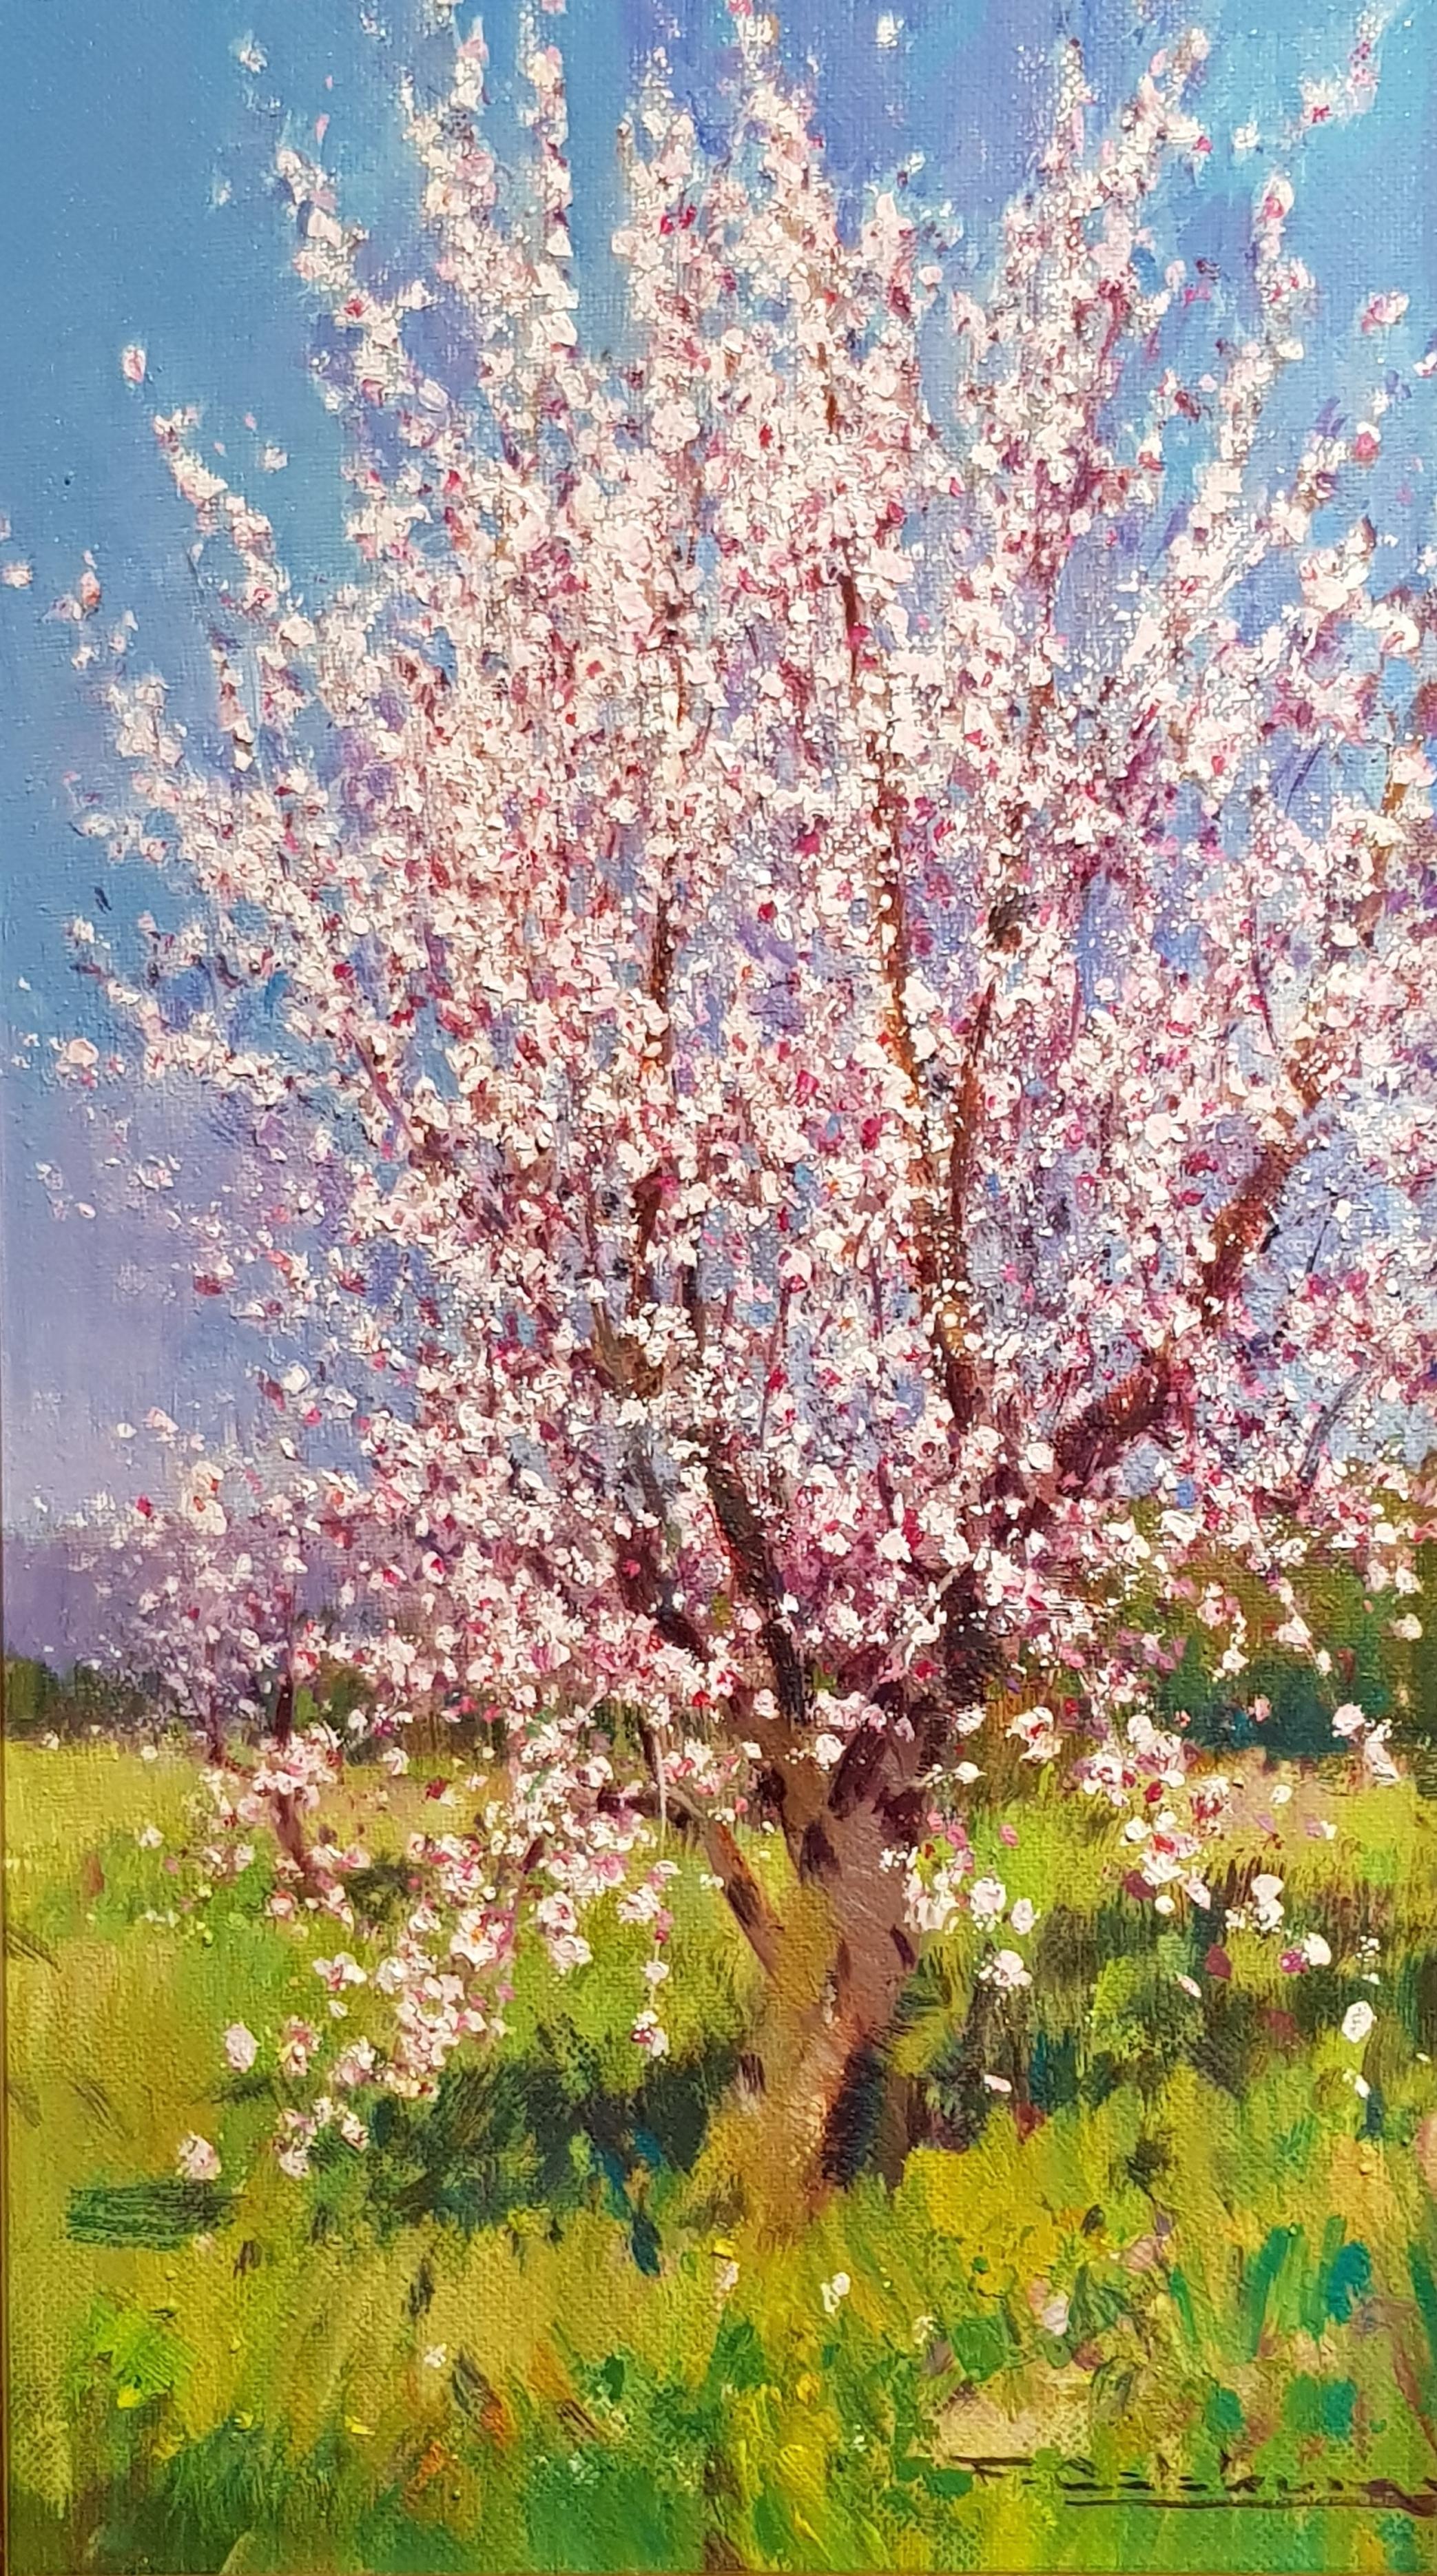 Francisco Calabuig Landscape Painting - Contemporary Landscape painting of a Spanish Almond Orchard 'Blossom in Bloom II